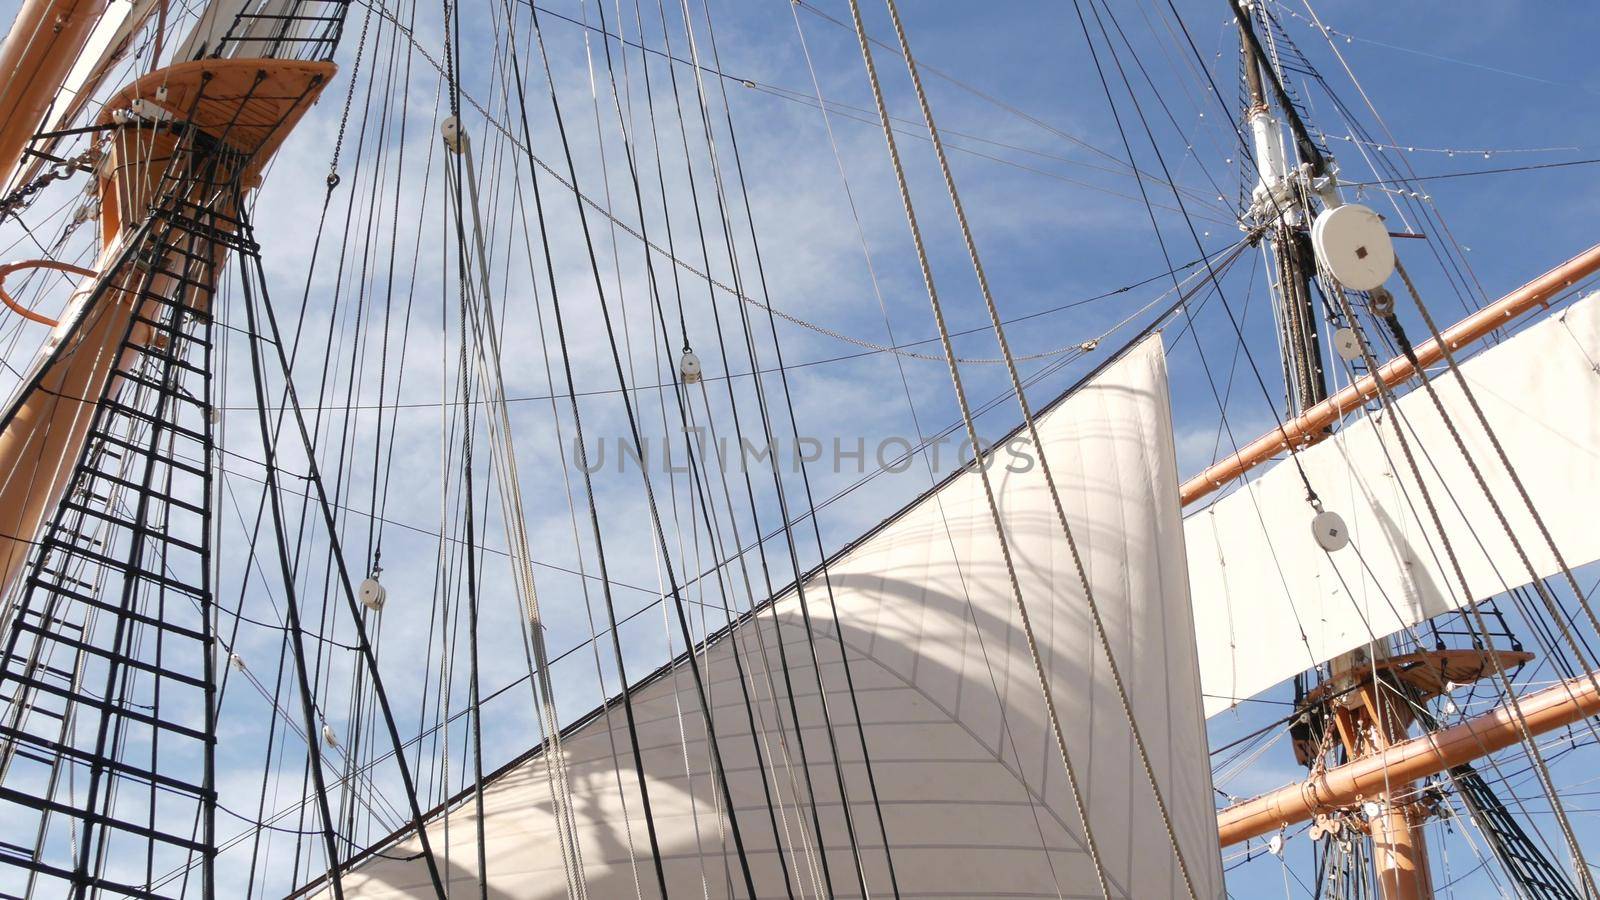 SAN DIEGO, CALIFORNIA USA - 30 JAN 2020: Retro sailing ship Star of India, full rigged wooden masts of Maritime Museum. Historic British frigate with white sails and ropes. Old large barque sailboat by DogoraSun